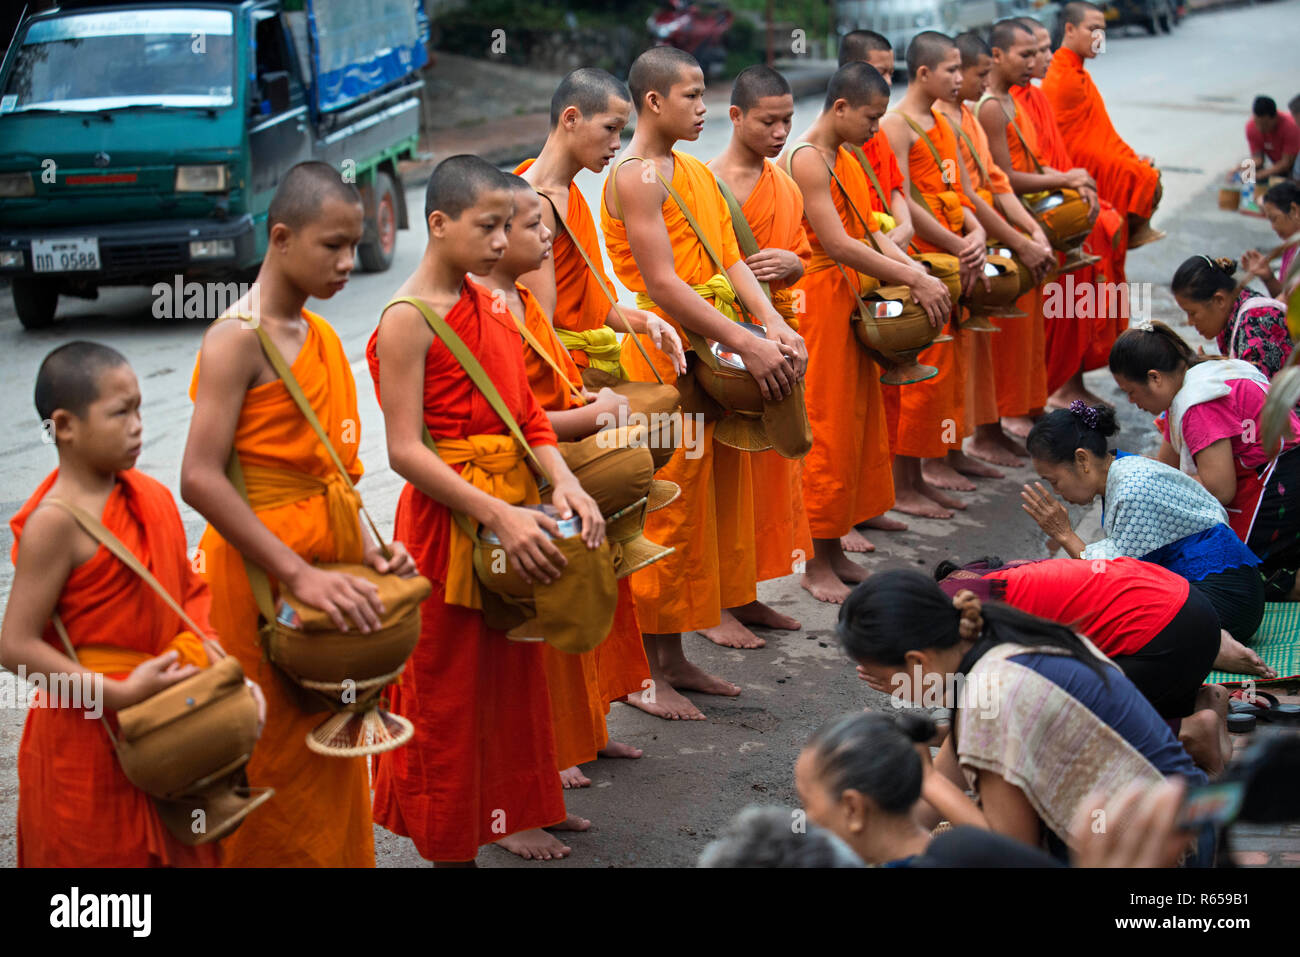 Tak bat ritual - Buddhist monks receive rice and food from pupulation in early morning in Luang Prabang , Laos, Asia Stock Photo